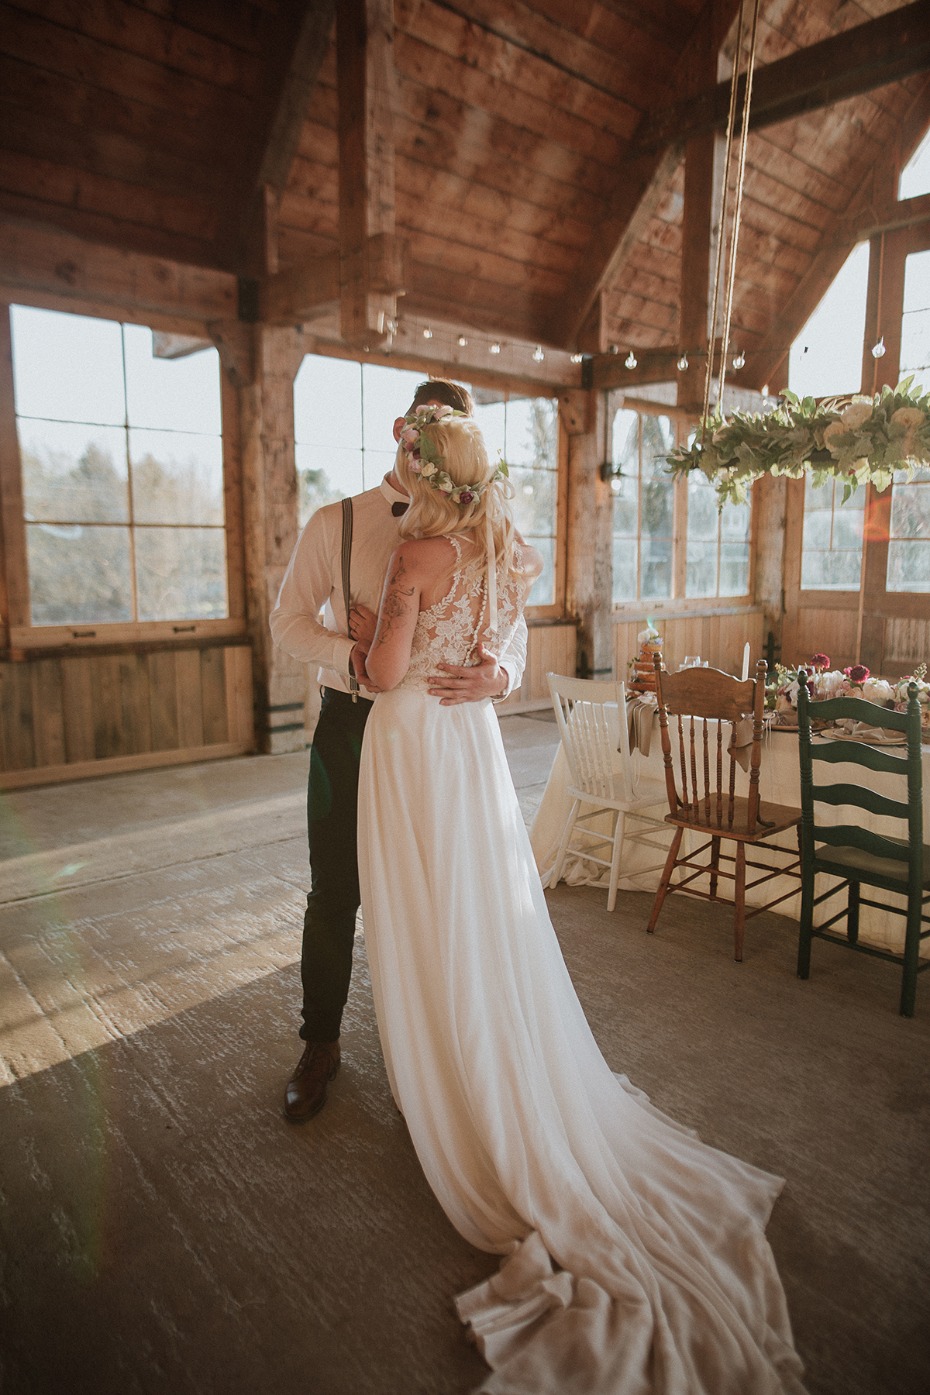 How To Have A Magical Cabin In The Woods Wedding